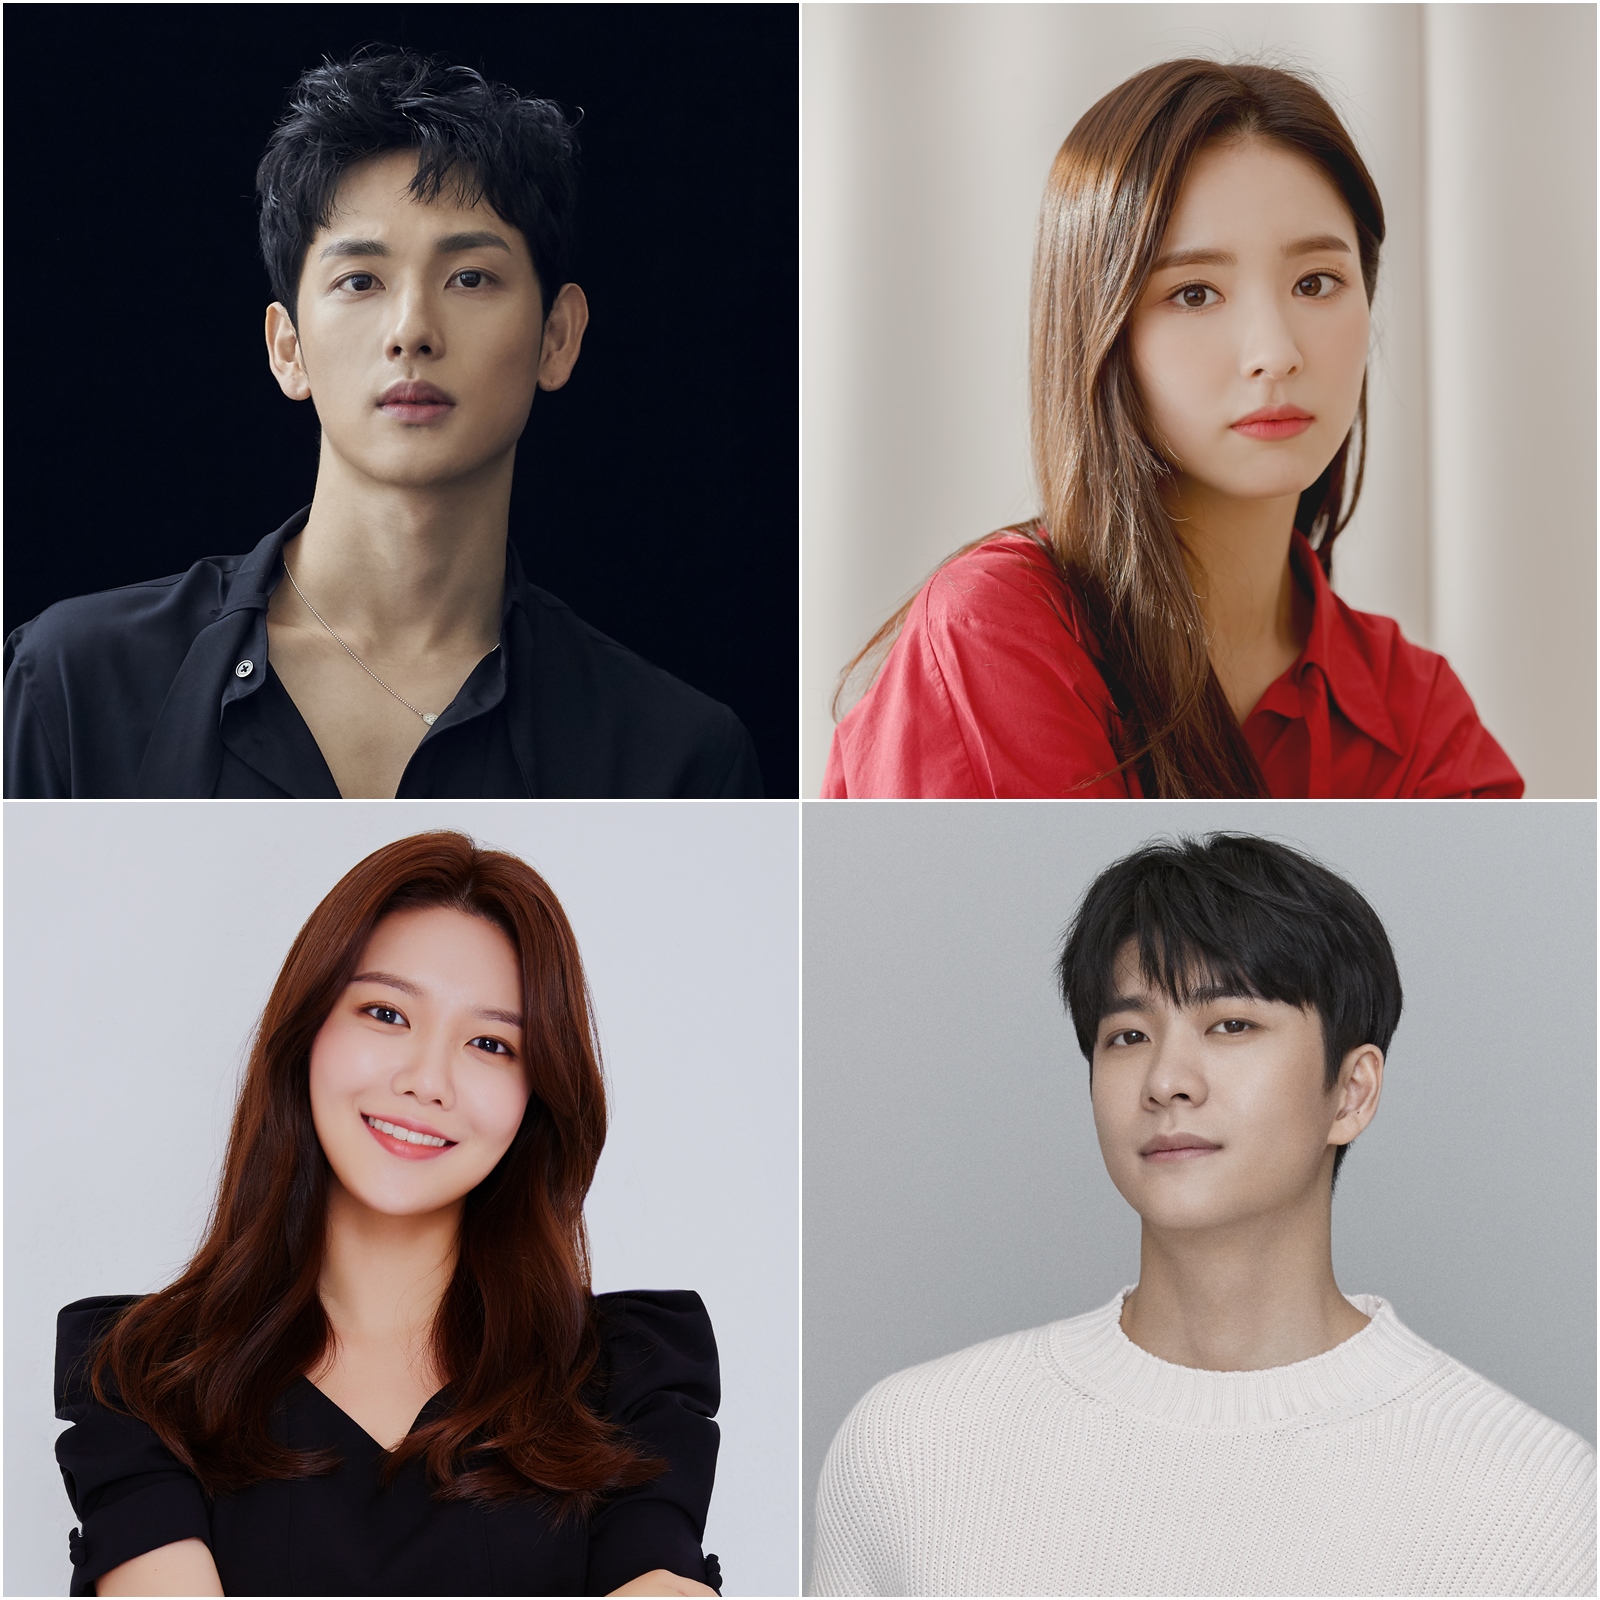 Actor Siwan, Shin Se-kyung, Choi Soo Young and Kang Tae-oh confirmed their appearance in Run On.JTBCs new Drama Run-on is a romance drama in which people living in different worlds communicate and form relationships in their own languages and run on love in an era where communication is difficult while writing the same Korean.First, Siwan and Shin Se-kyung are divided into short-range national team James Kyson who is defeated at the moment of looking back and Oh miju, a translator who has to rewind numerous times.James Kyson, who was a star in the athletics world who showed off his ticket power in the unpopular athletics, but retired without hesitation due to the incident that changed his life.Oh miju, who has been together since the moment of departure from the track, opens his eyes to other worlds that were not seen in Run World.Oh miju works to put a bridge between different languages.I was conscious of a foreign language that I would not have known if I had not had a subtitle because of the movie I saw at the first theater, and when the subtitles I was grateful for reached the level of intrusion, I became a translator without hesitation.For the first time, I find myself expecting James Kyson, a man who has come to fate as much as the thrill I felt when the credits Oh miju climbed.Siwan, who had digested the process of anxiety turning into madness through Drama Other is Hell last year, and Shin Se-kyung, who showed off the power of the Roco Queen through the new officer Both Actor are the first home theater comeback in more than a year.Siwan, who will show romance acting for a long time, and Shin Se-kyung, who will write a deep love language that is different from his previous work.Two men and women living in a world that seems to have no intersections are looking forward to seeing whether the language of love can succeed in translation.Choi Soo Young and Kang Tae-oh co-work with the e-movie of the presence of sports agency representative West Dana and ionic beverage.It is the only enemy of the signing group, and it is the West Dana who is pushed from the succession order only because it is not a son.So she tries to live perfectly to get back what was originally mine. This movie comes into her life that has lived so fiercely.Seo Dan-ah, who lived without knowing the apology, was the first man to be sorry for being busy.Lee Young-hwa, who lives a life of a popular senior in art college with an oxygen-like charm, is a college student who likes the same movie and croquette as his name.It was everyday to go out to the streets with a sketchbook, or to Crookie while watching movies in his space. One day I met a strange woman, Seo Dan-ah, who asked me to draw a picture.I want to see a woman like Rapunzel who can not come down in that tall building.The combination of Choi Soo Young, who has solidified his position as an actor by gradually crossing TV and screens such as Drama Tell Me What You See and the movie Girl Cops, and Kang Tae-oh, who showed a previous villain force through Chosun Roco - Mungdujeon last year, is also interesting.This is because I have already been able to act on the character of men and women living in a completely different world, so I wonder how they will meet and communicate in what language.This is why different romance chemistry is expected.The production team will draw a story about the protagonists who have different worlds, who meet each other, grow through each other, break the frame that they have locked themselves, influence, and love each other.I hope that this will be a time to worry about the language and communication that conveys my heart. Hot Actors with both acting power and presence, such as Siwan, Shin Se-kyung, Choi Soo Young, and Kang Tae-oh, will communicate with viewers in a different romance in the second half of this year.I would like to ask for your expectations and interest.Meanwhile, Run On will be aired on JTBC in the second half of this year.